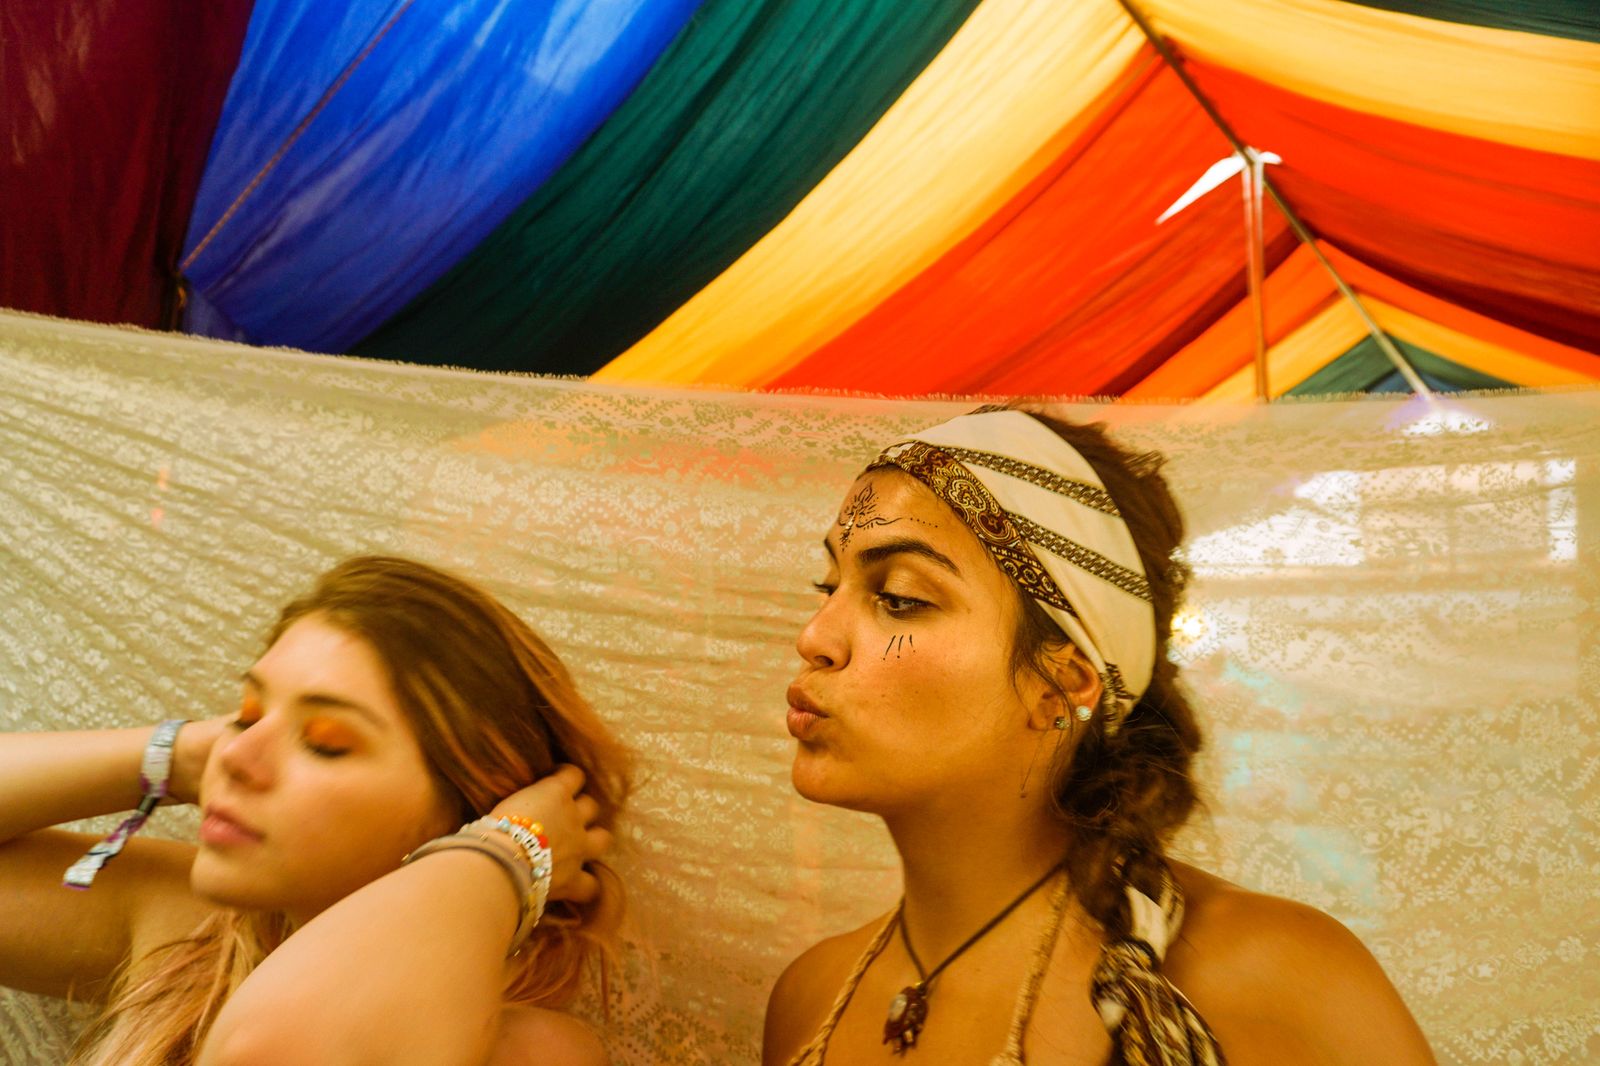 © Samantha Morse - Ragen and Saddie look upon themselves before leaving a colorful dress tent.